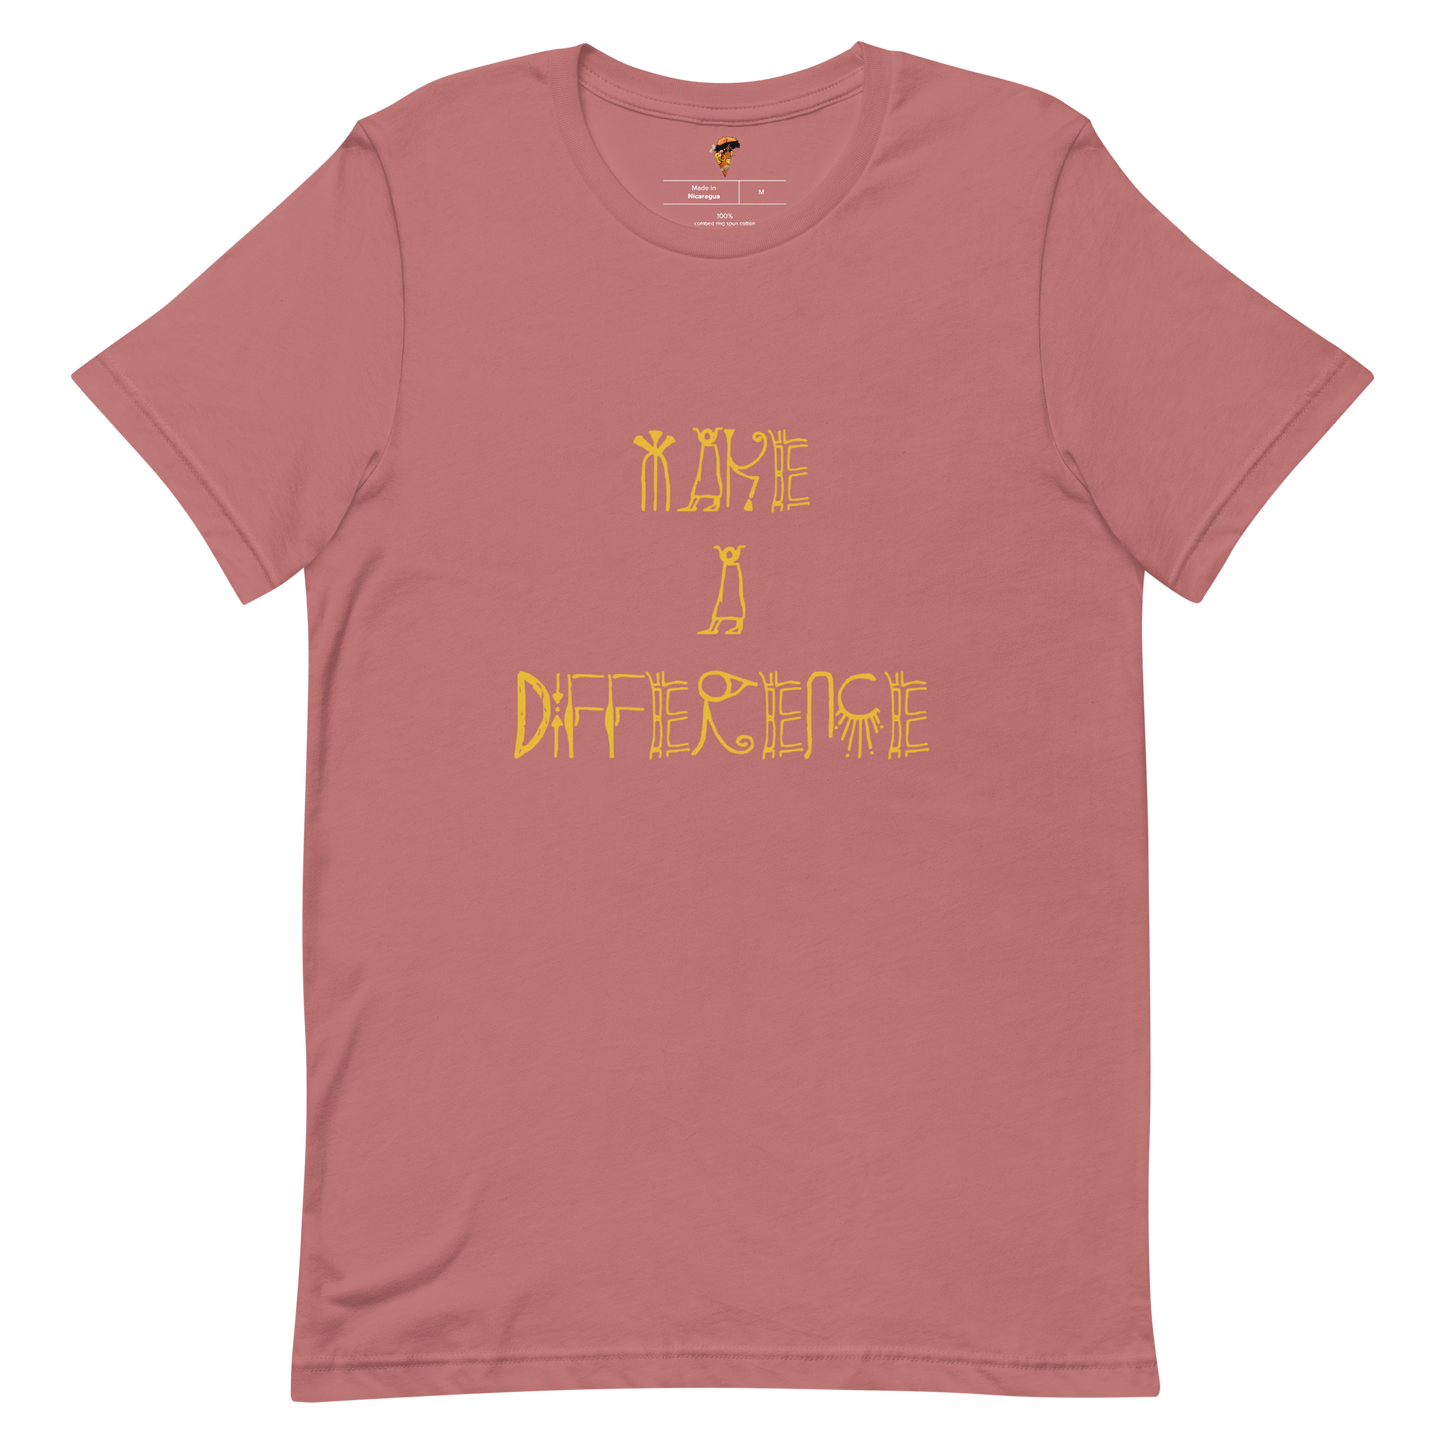 Short-Sleeve Make A Difference Unisex T-Shirt